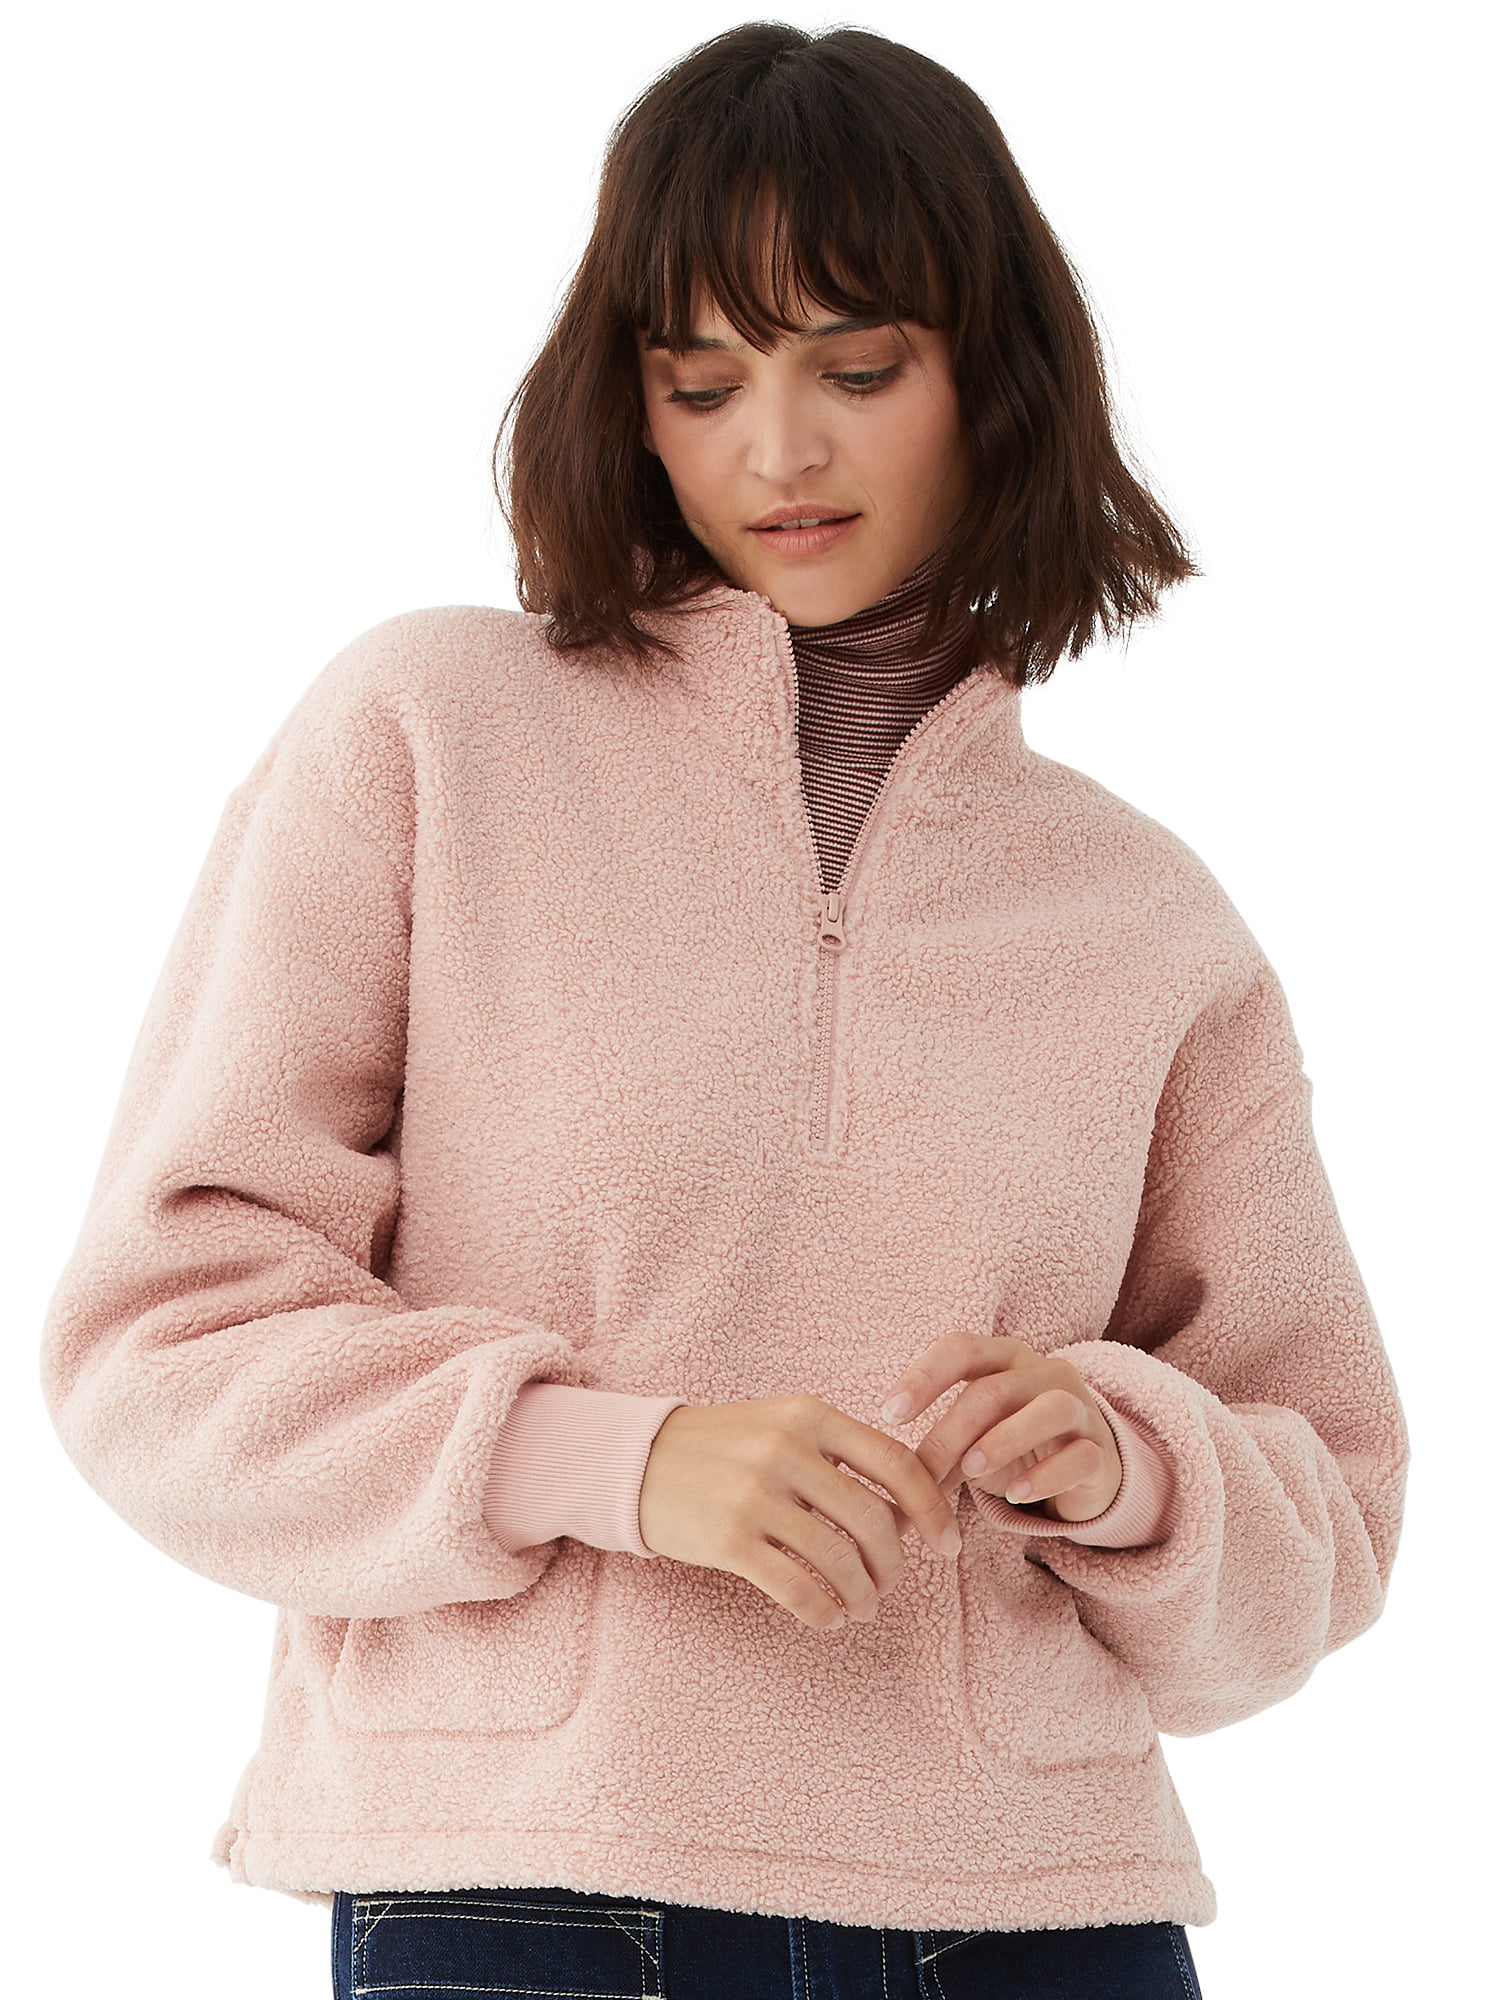 pink hoodie outfit womens